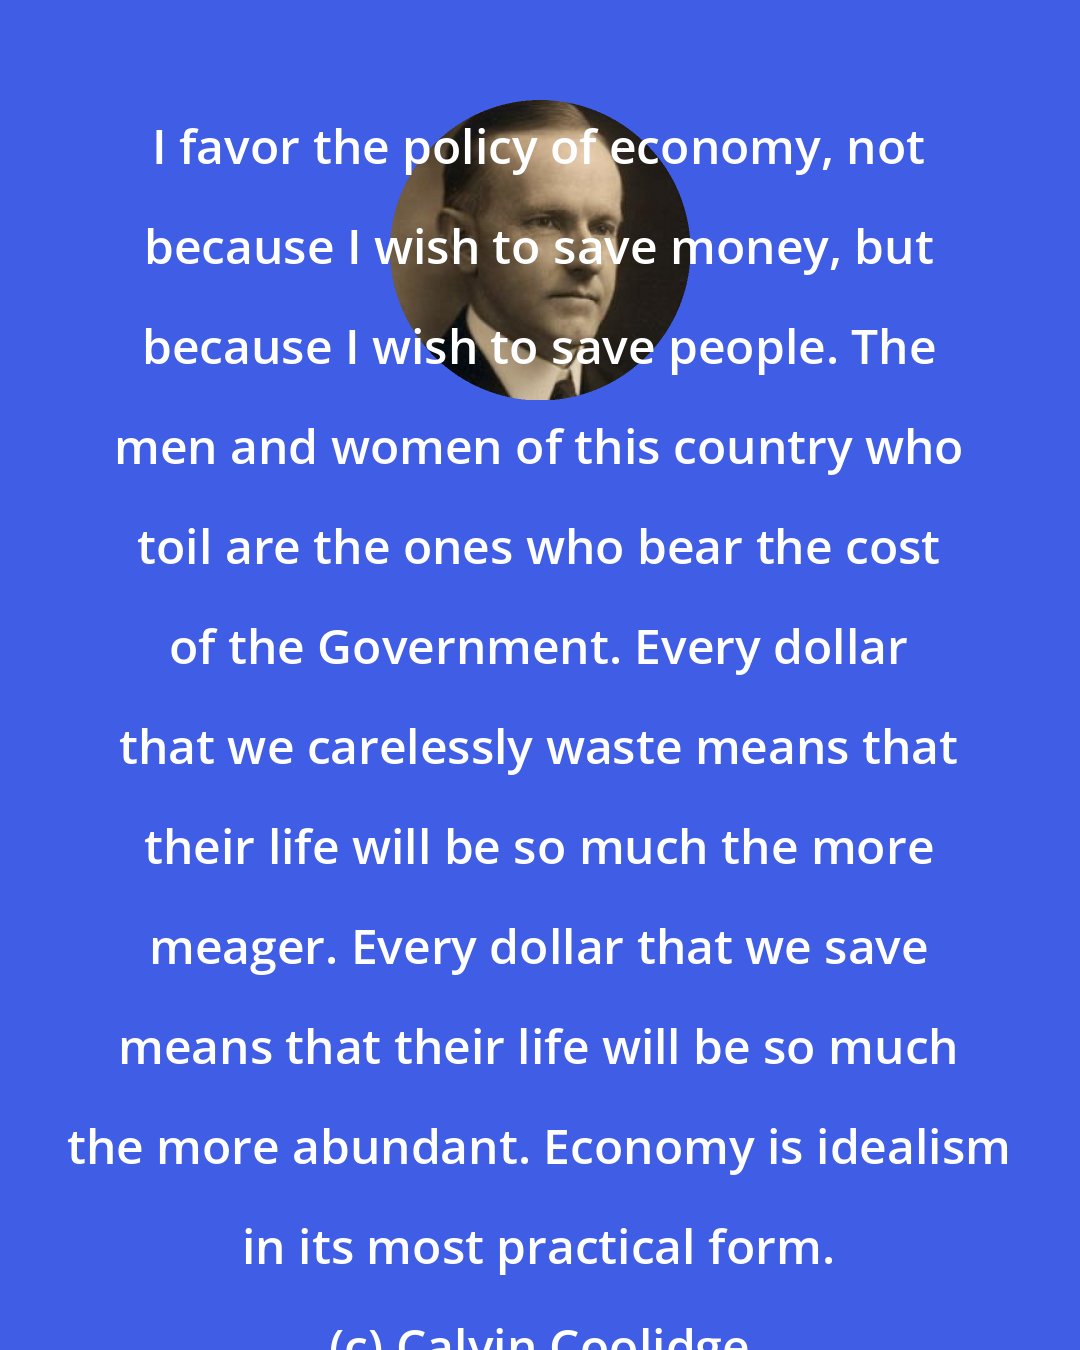 Calvin Coolidge: I favor the policy of economy, not because I wish to save money, but because I wish to save people. The men and women of this country who toil are the ones who bear the cost of the Government. Every dollar that we carelessly waste means that their life will be so much the more meager. Every dollar that we save means that their life will be so much the more abundant. Economy is idealism in its most practical form.